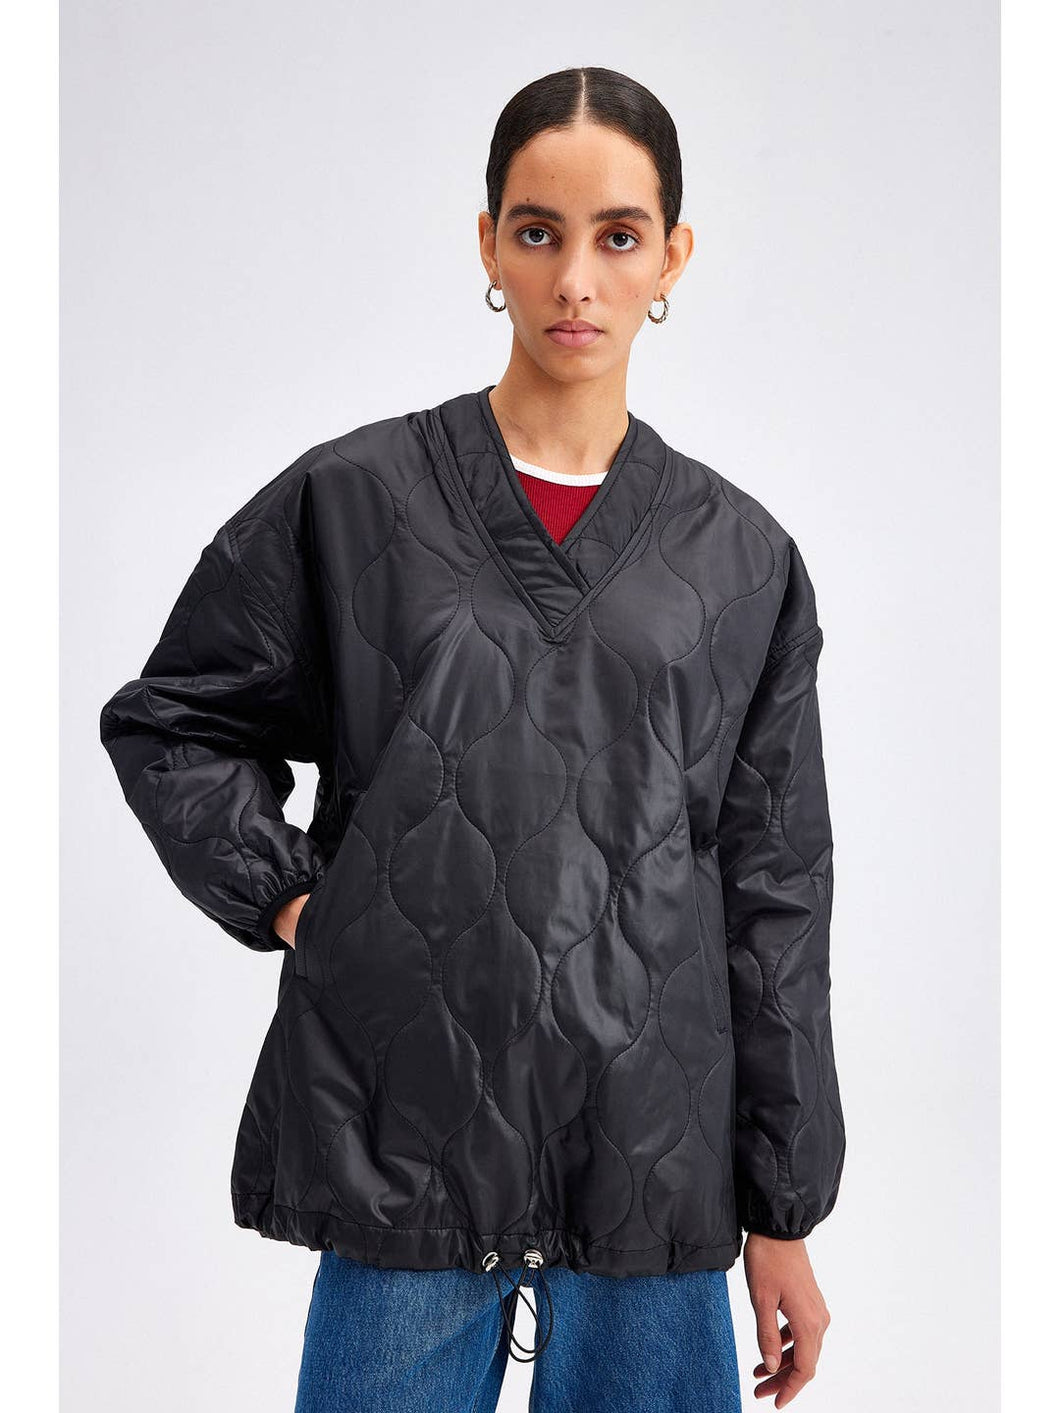 Touché Privy quilted windbreaker (SZ 36-40)